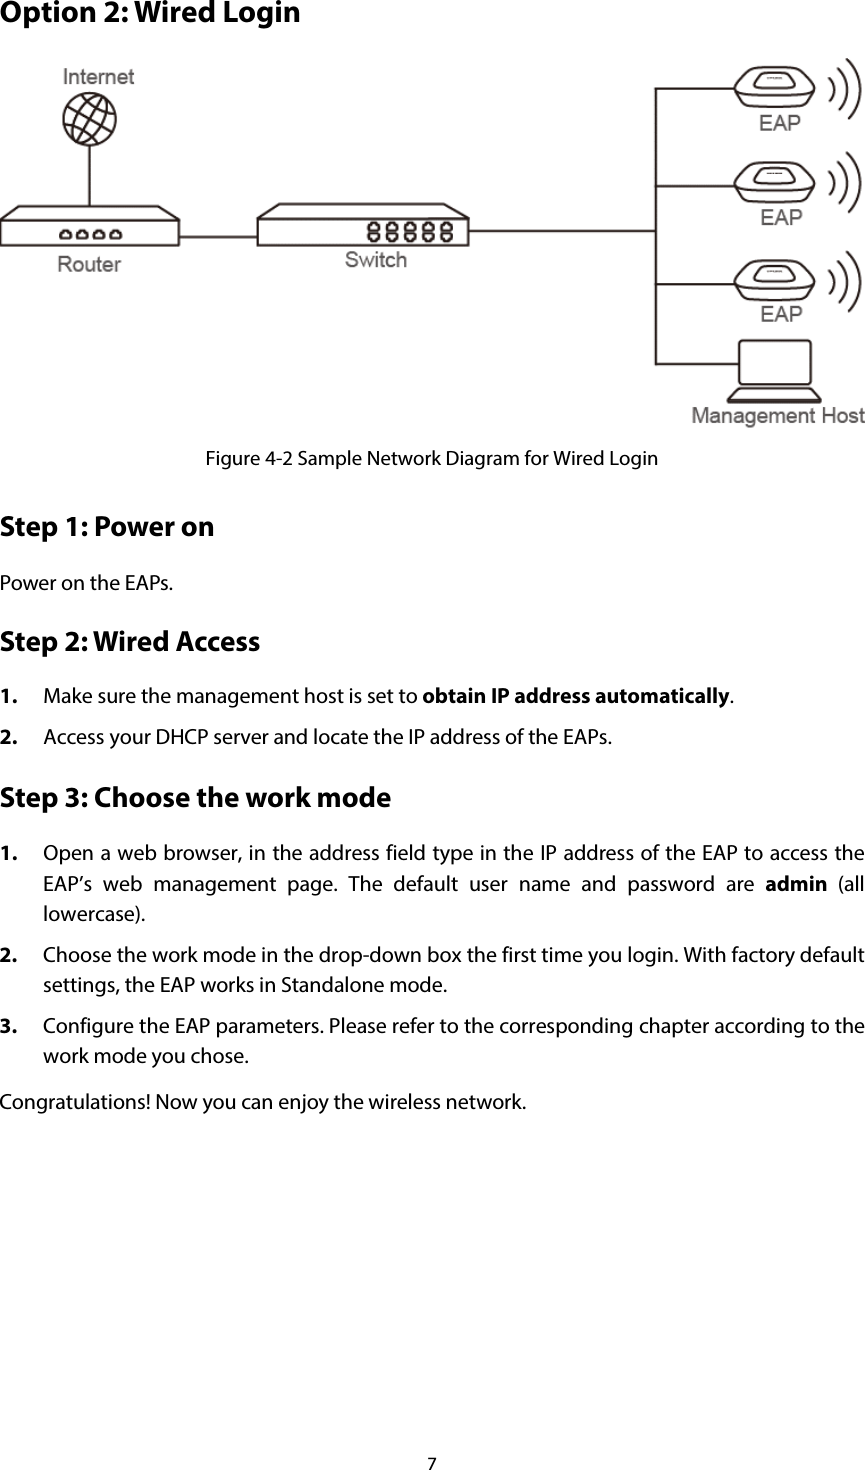 7 Option 2: Wired Login  Figure 4-2 Sample Network Diagram for Wired Login Step 1: Power on Power on the EAPs.   Step 2: Wired Access 1. Make sure the management host is set to obtain IP address automatically. 2. Access your DHCP server and locate the IP address of the EAPs. Step 3: Choose the work mode 1. Open a web browser, in the address field type in the IP address of the EAP to access the EAP’s web management page. The default user name and password are admin (all lowercase). 2. Choose the work mode in the drop-down box the first time you login. With factory default settings, the EAP works in Standalone mode. 3. Configure the EAP parameters. Please refer to the corresponding chapter according to the work mode you chose. Congratulations! Now you can enjoy the wireless network.   